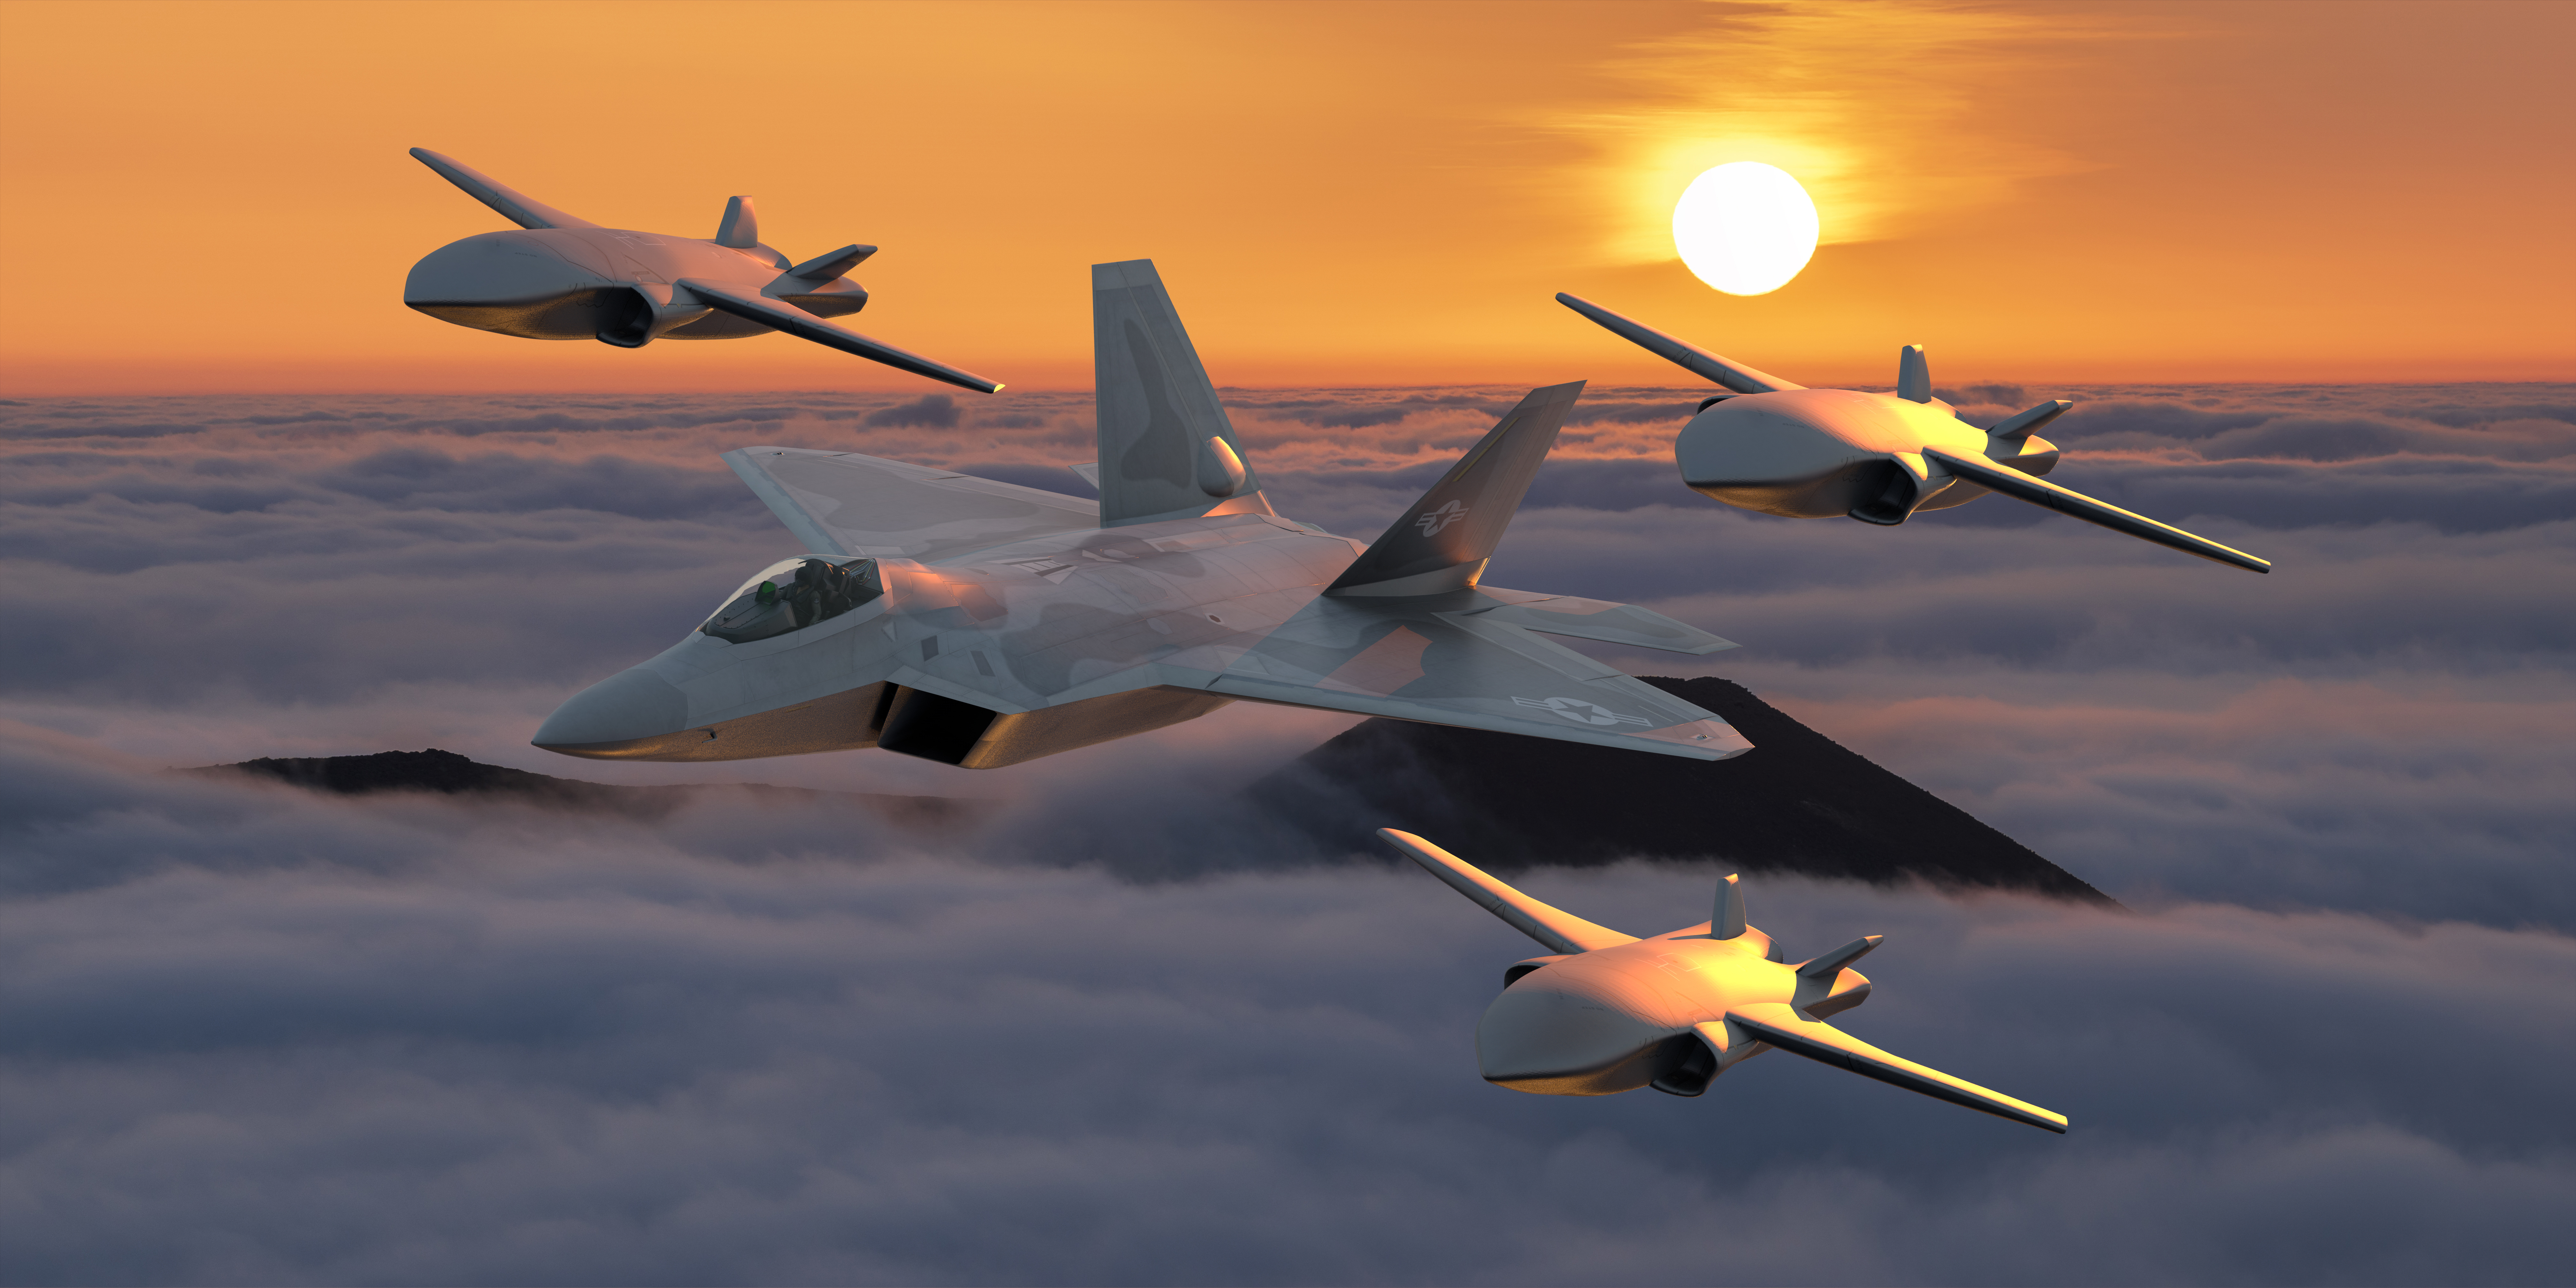 Lockheed Martin F-22 Raptor in a formation with combat drones from the Loyal Wingman program, artistic vision.